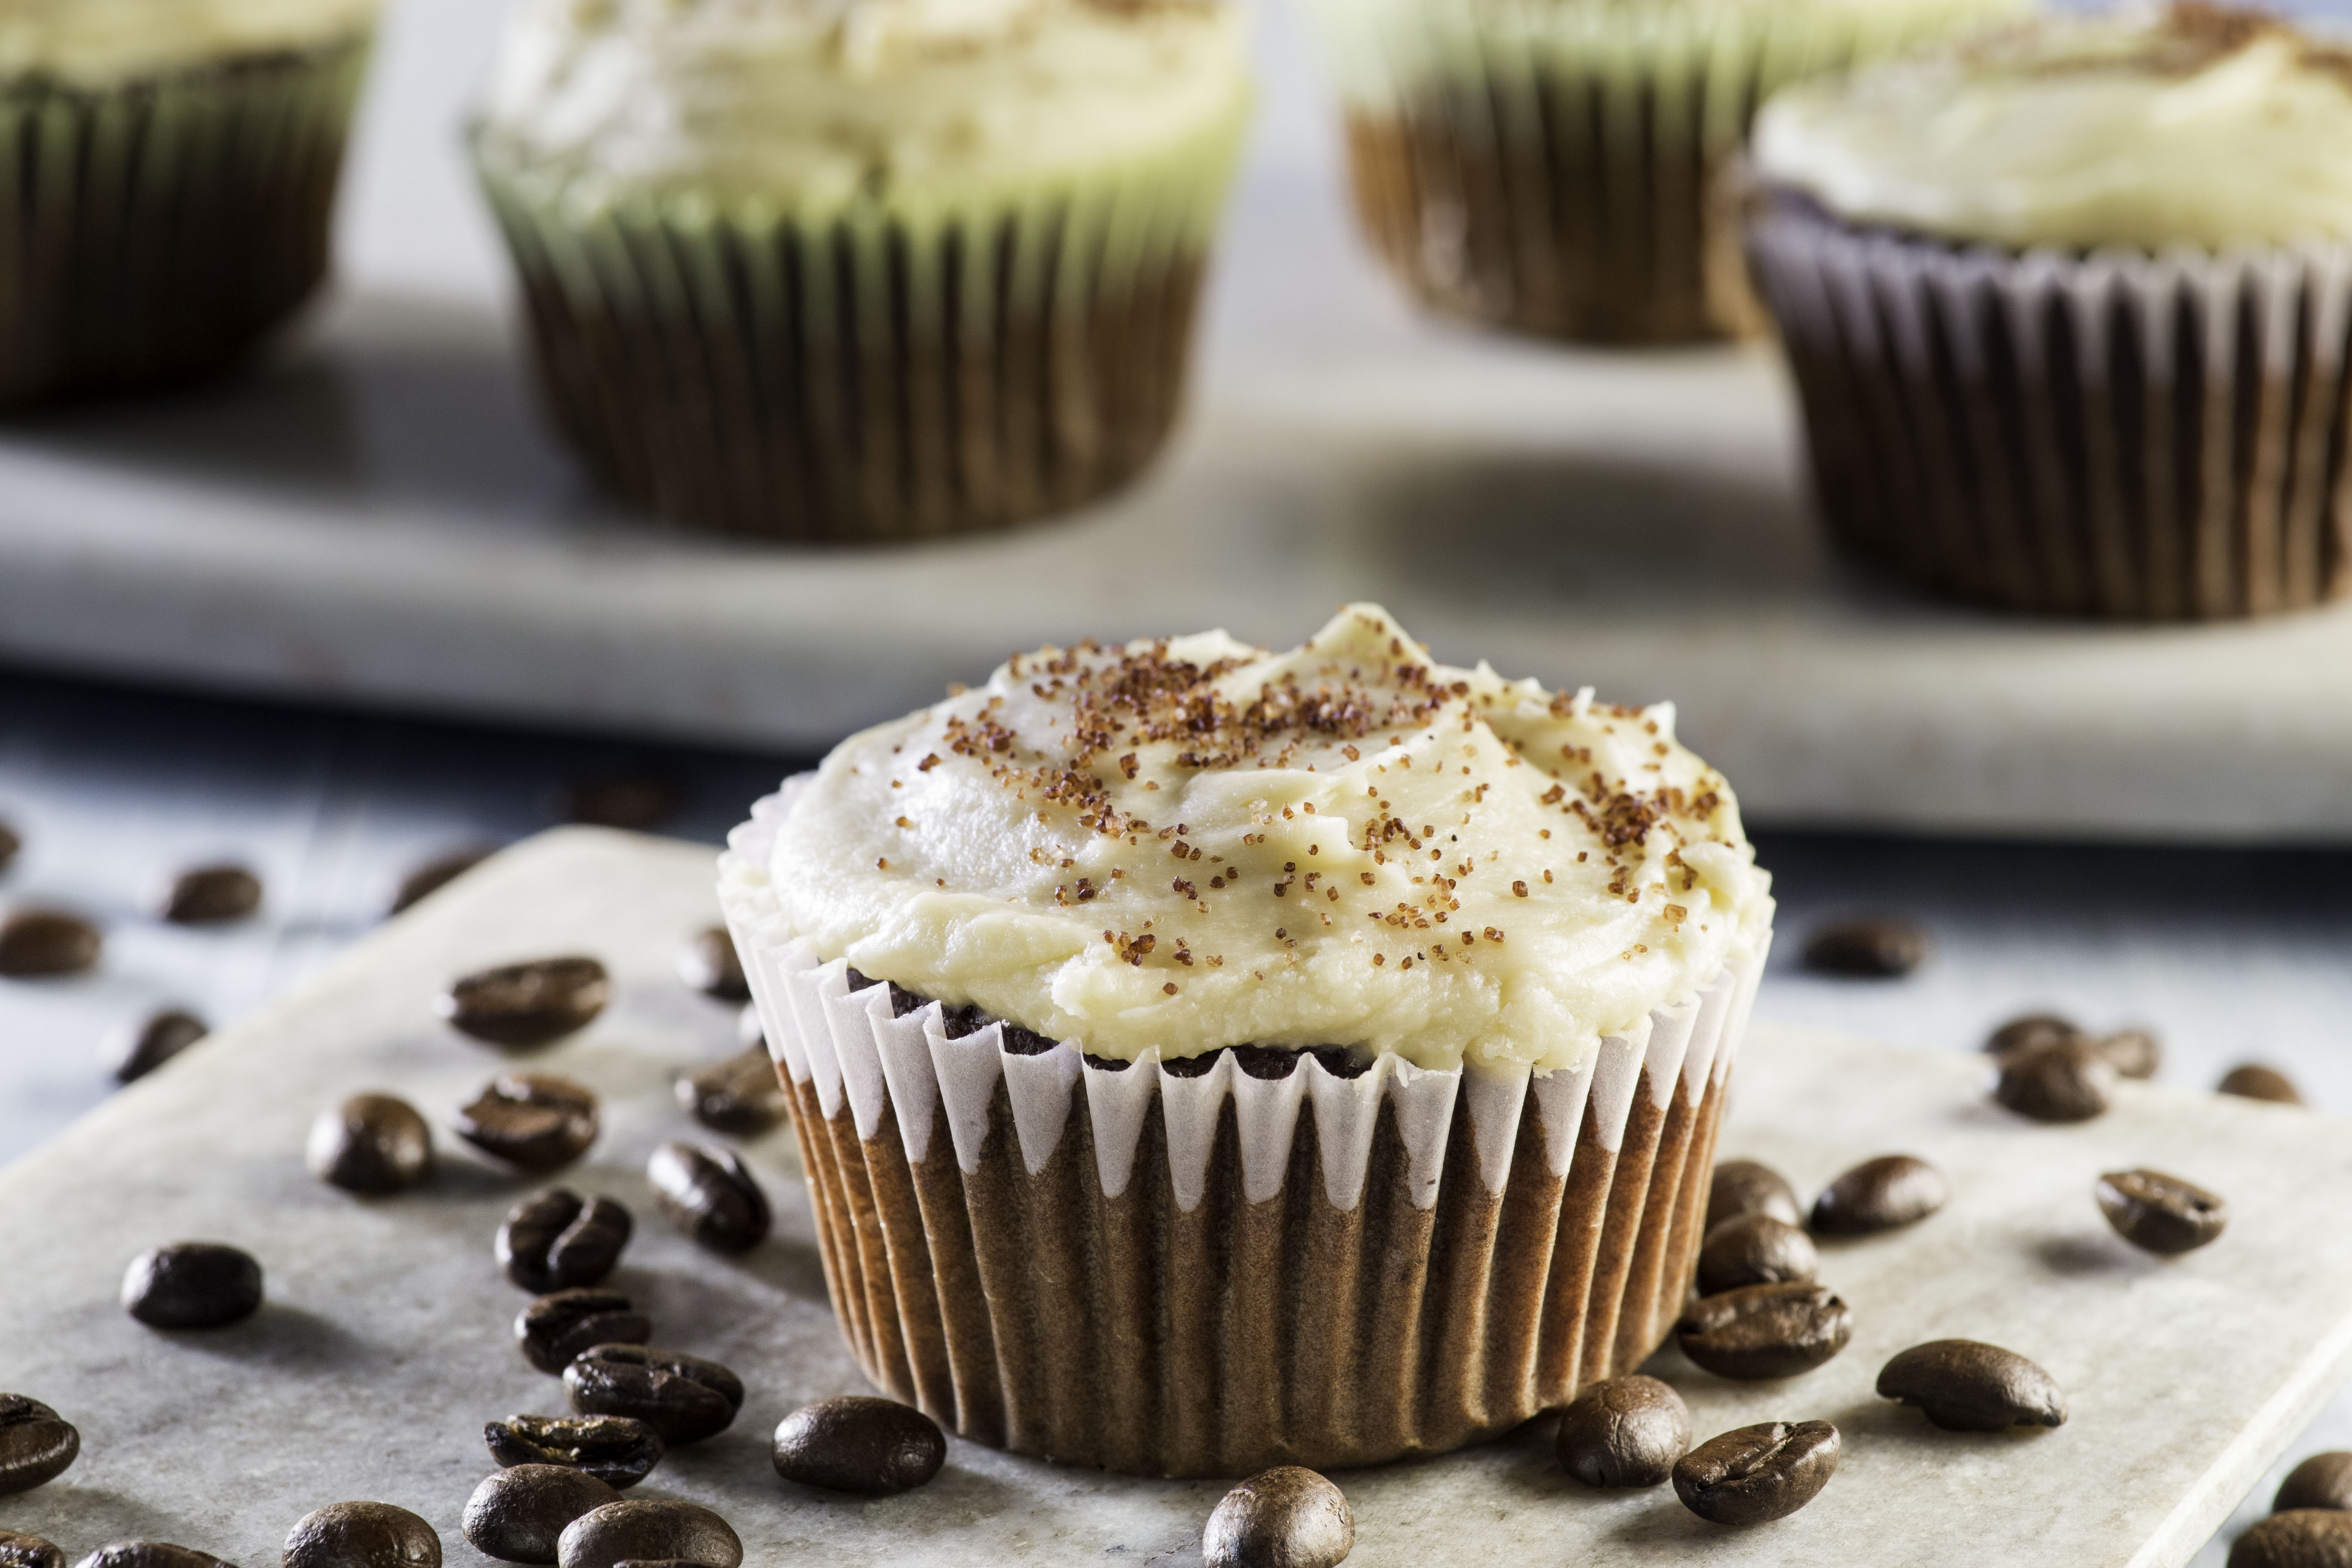 These decadent cupcakes are a winning combination of rich coffee-infused craft beer, chocolate cake, and cold-brew coffee buttercream - dad will love them! This is a half-scratch recipe that can be adapted to taste and will fill the kitchen with a wonderful coffee aroma dad's sure to love.